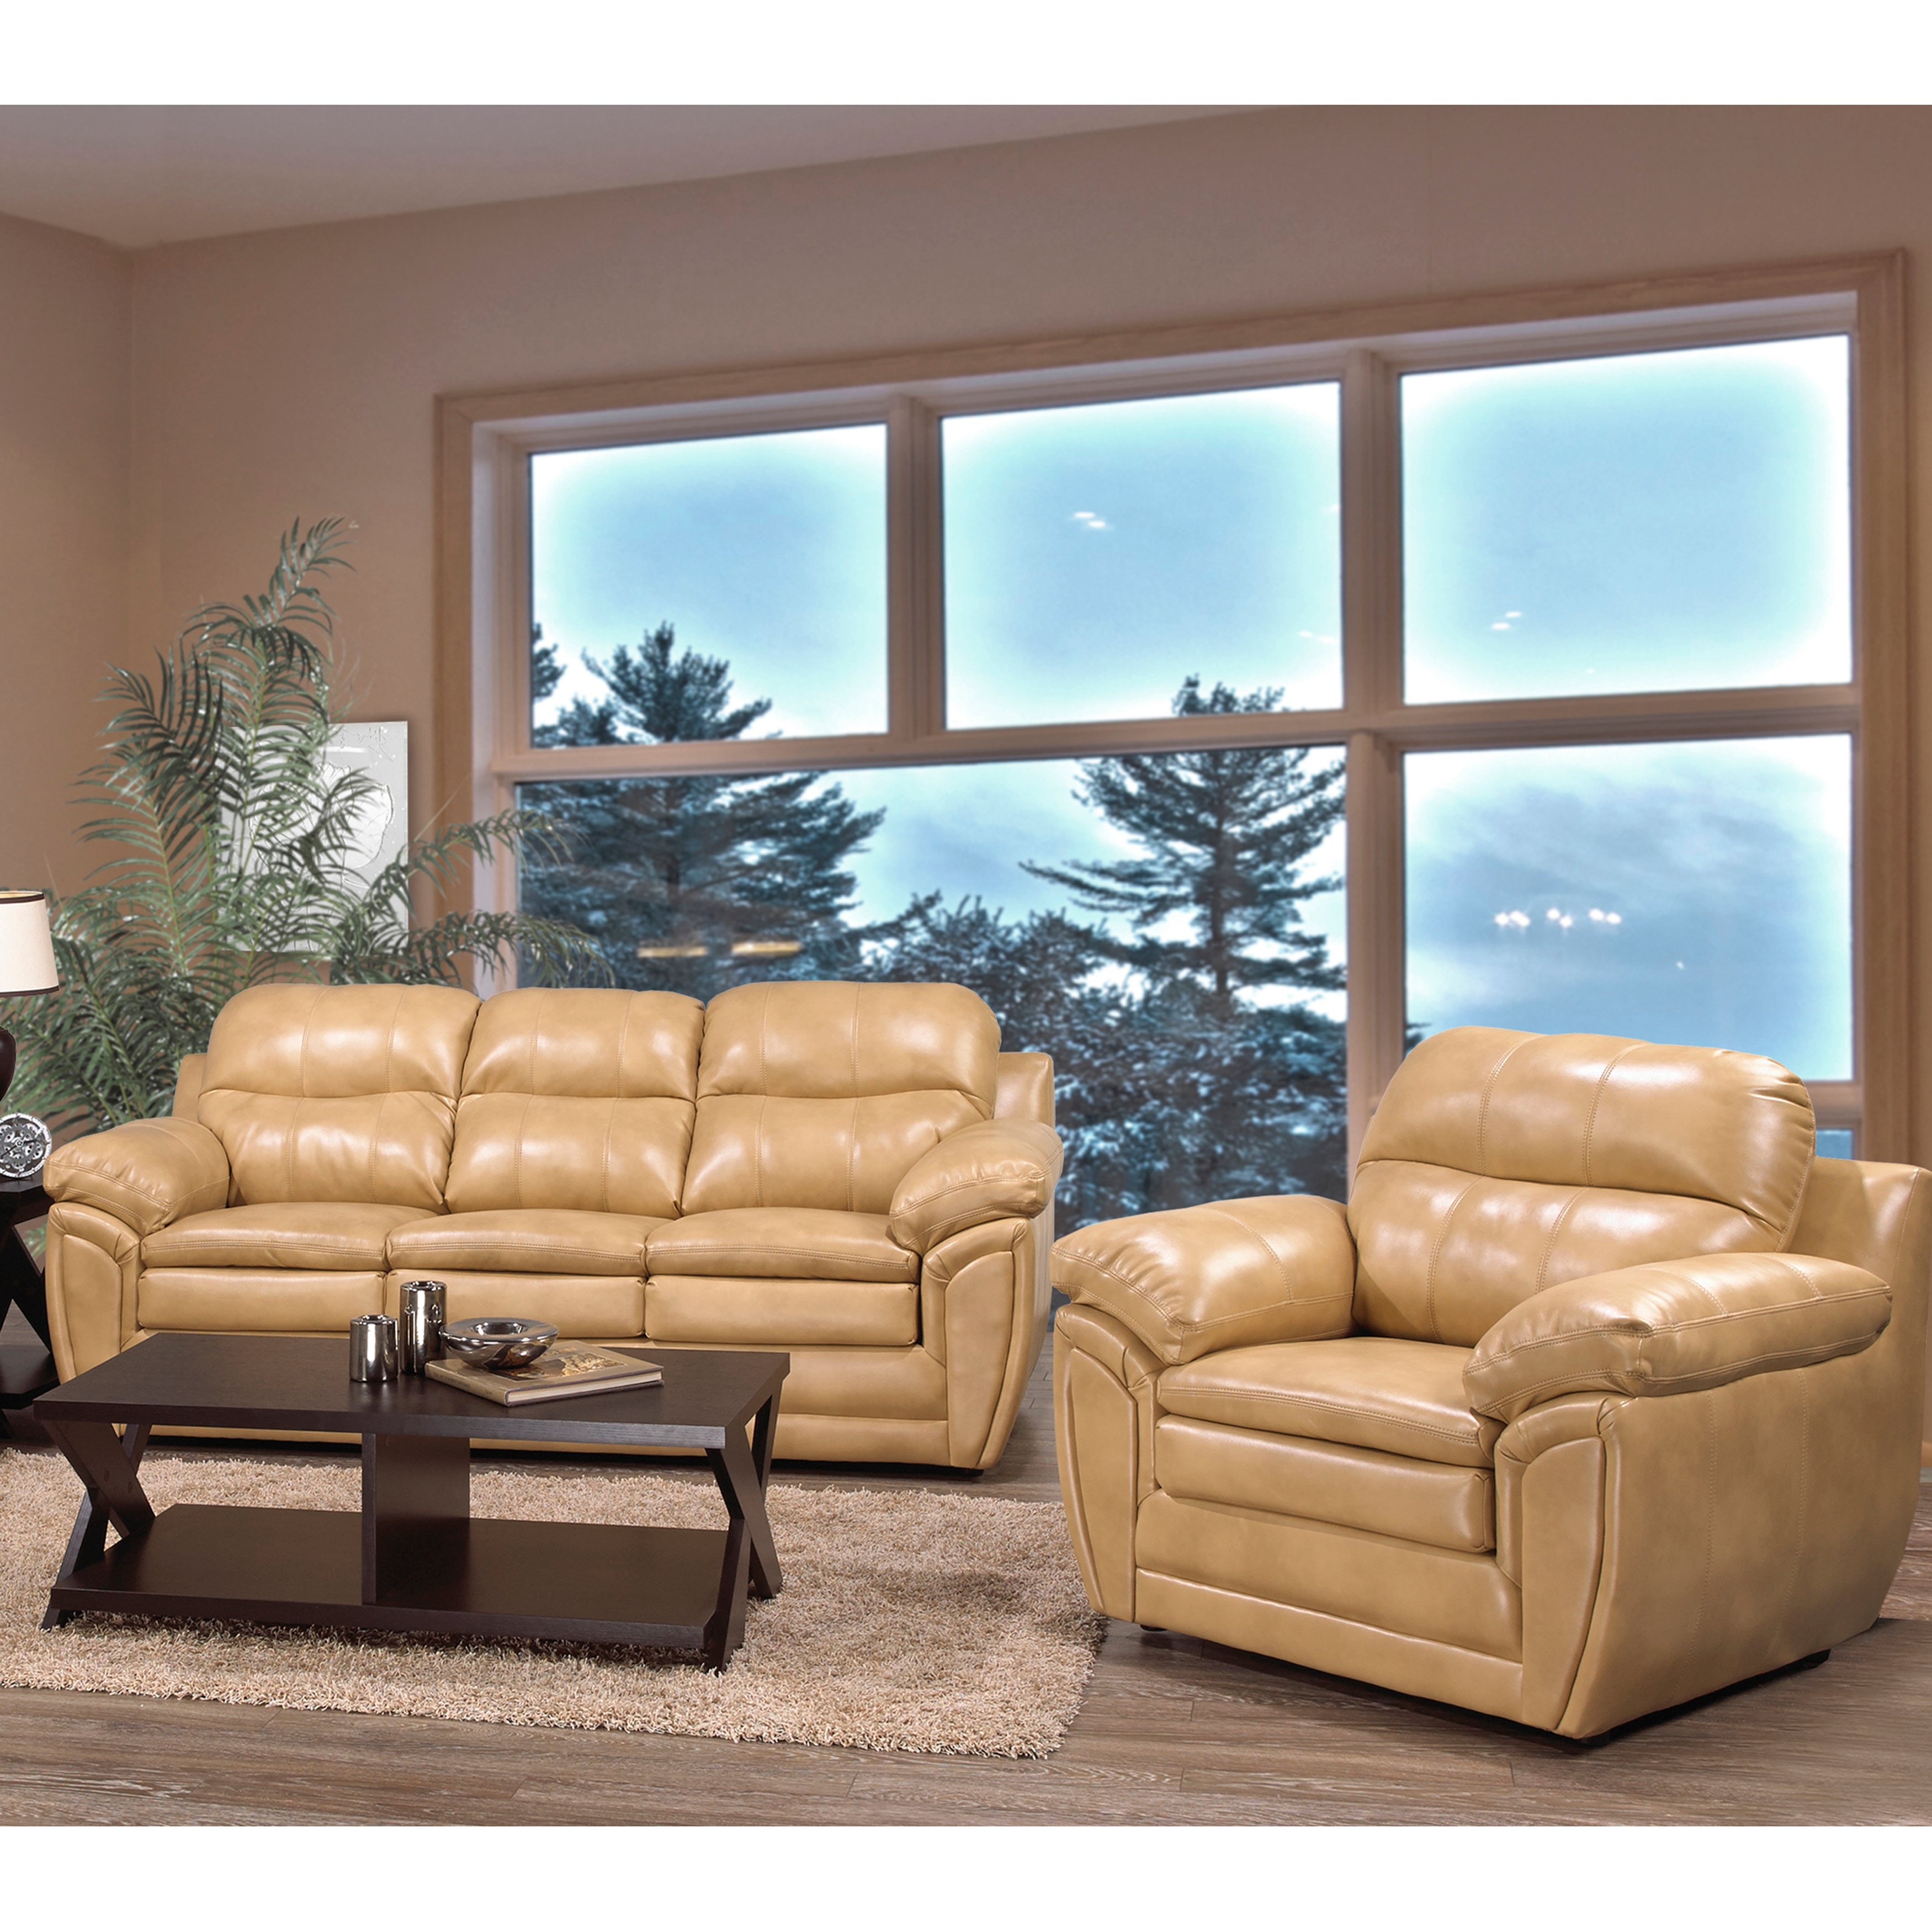 https://ak1.ostkcdn.com/images/products/is/images/direct/65d898ab02032f3ef5e7b61fab0d53612647eb44/Simon-Light-Tan-Brown-Leather-Gel-Sofa-and-Chair.jpg